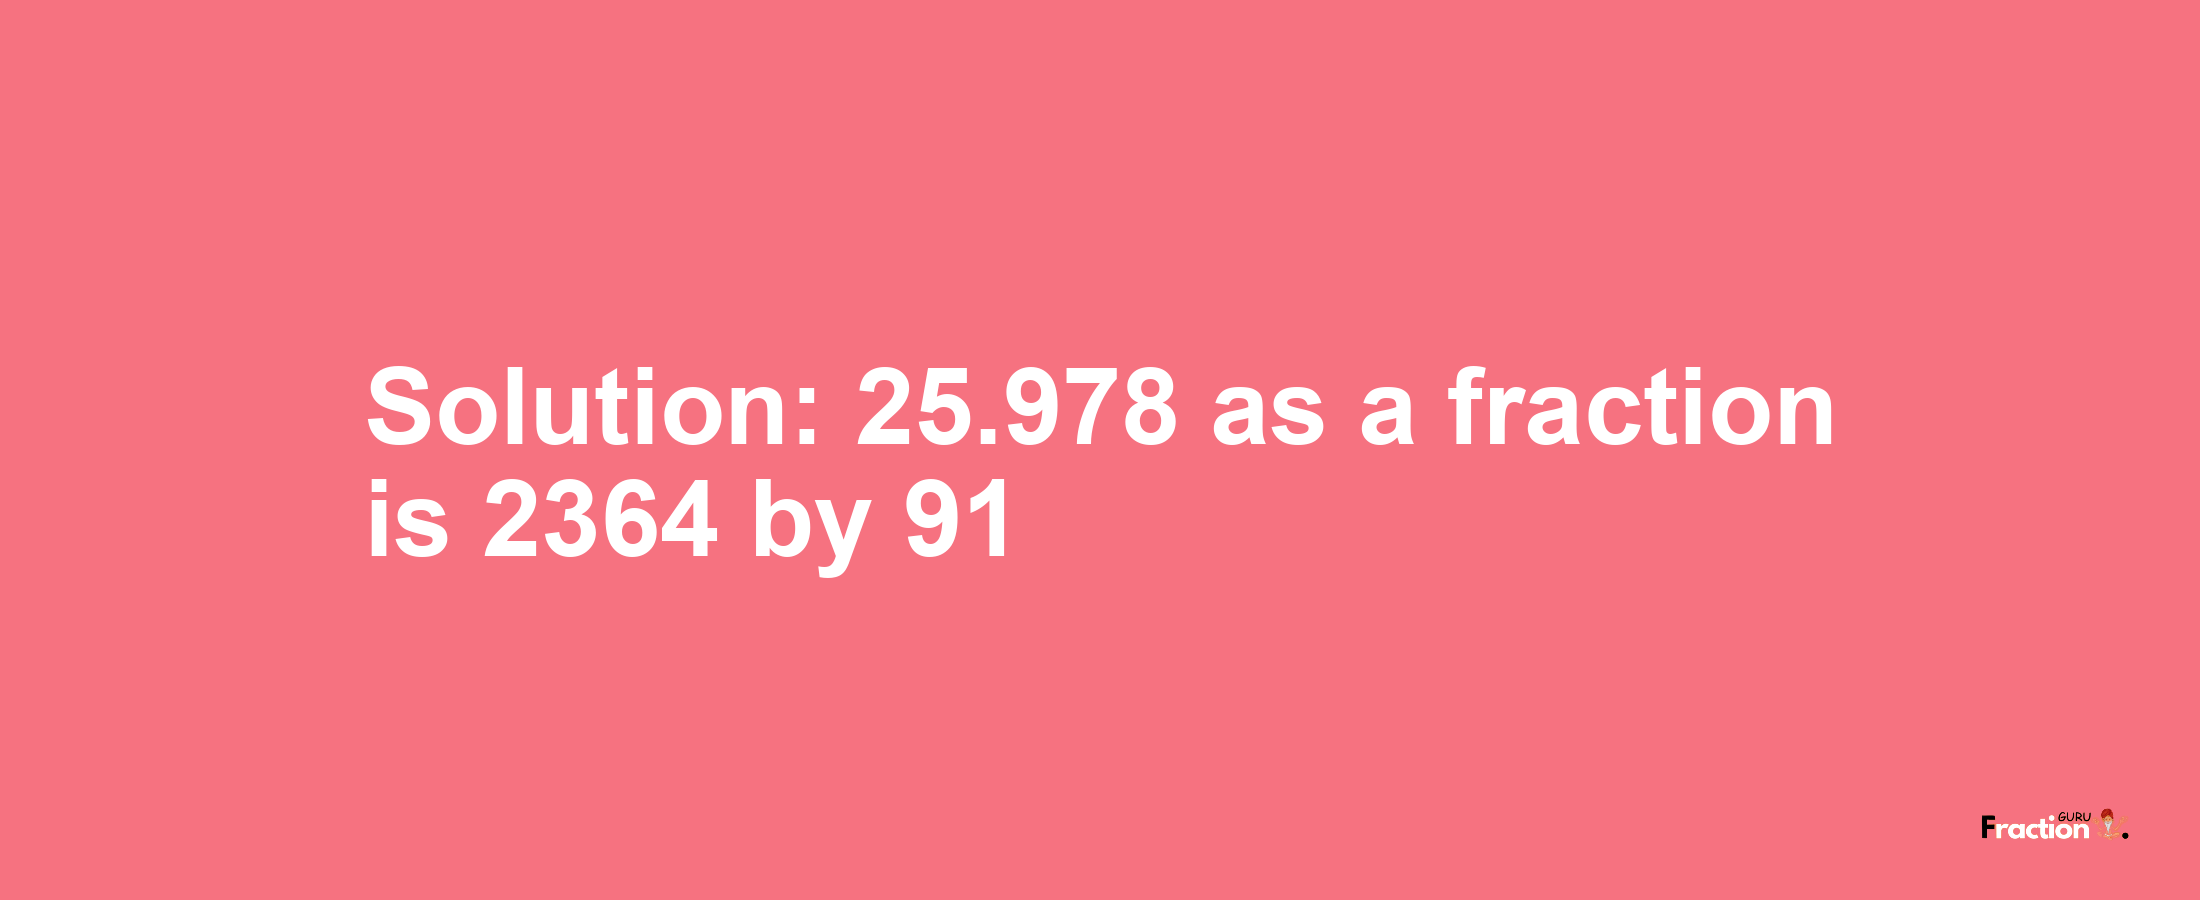 Solution:25.978 as a fraction is 2364/91